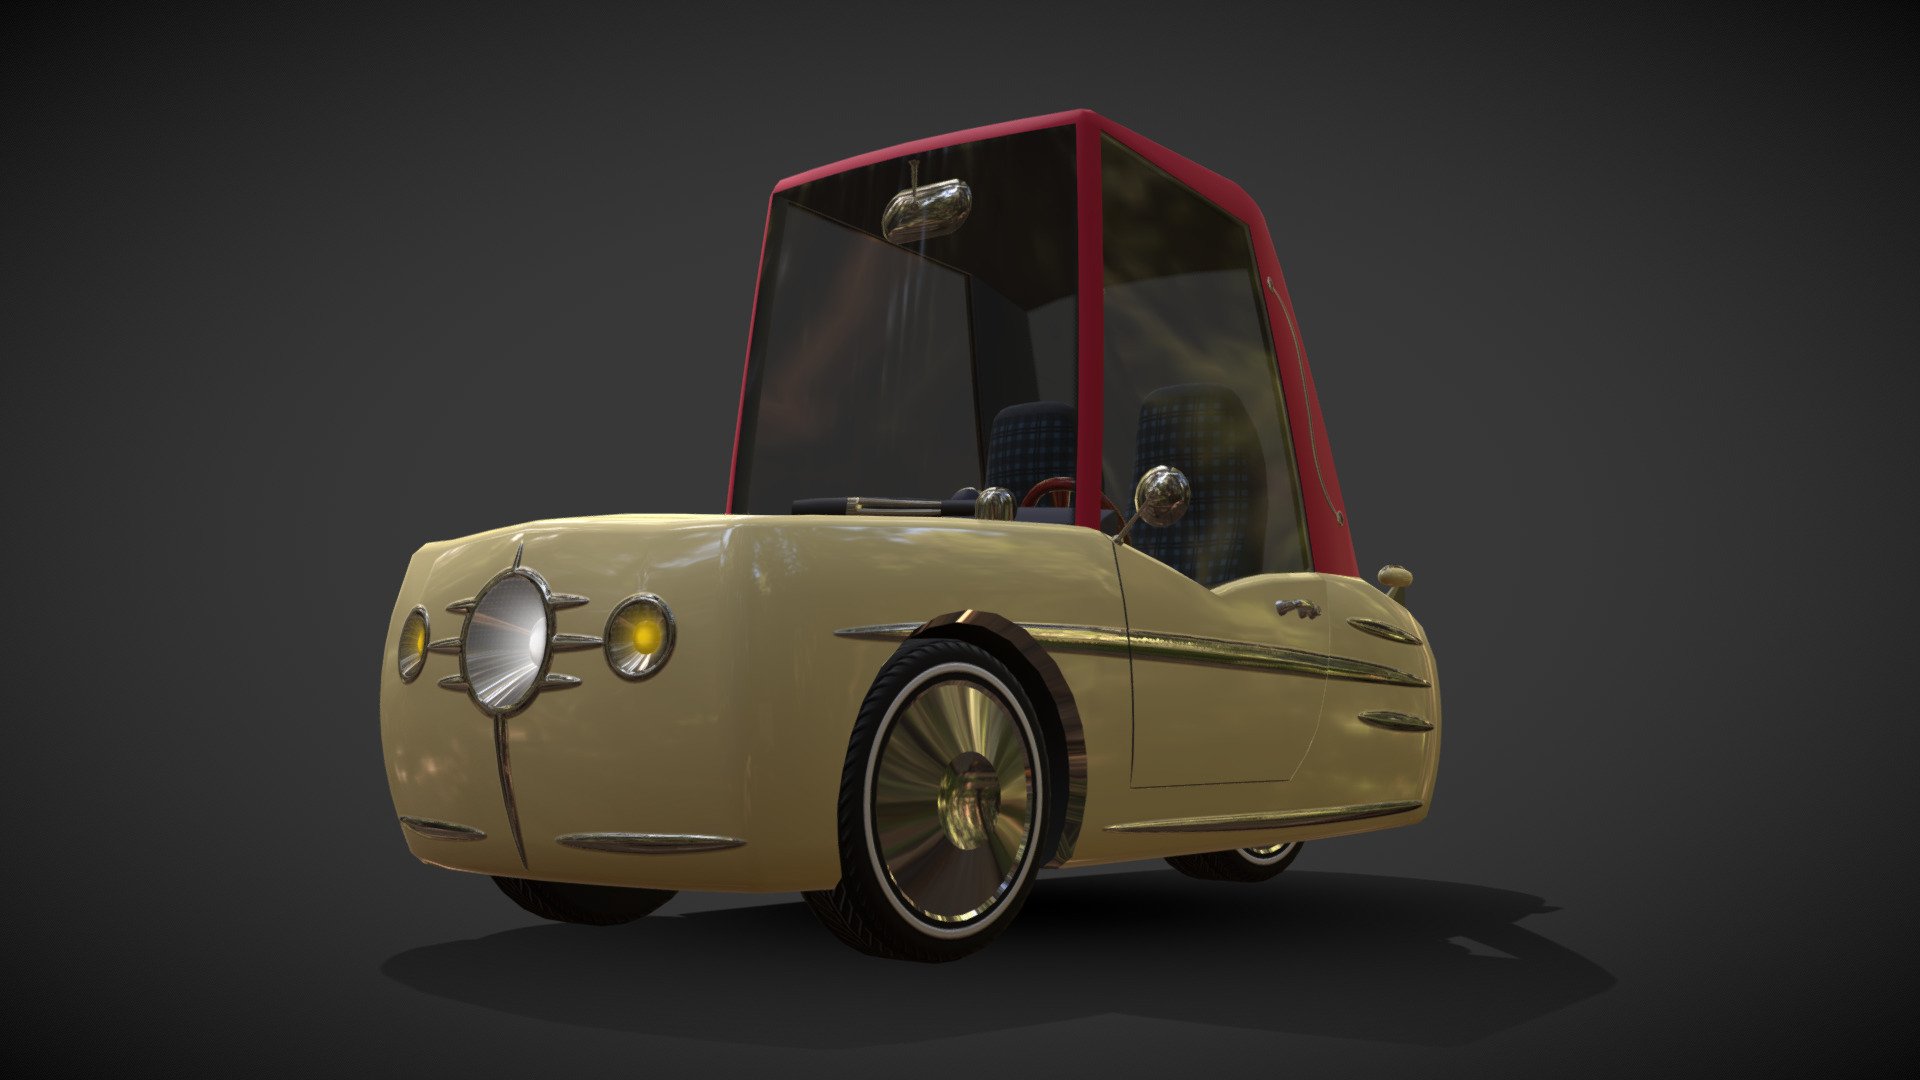 3 wheeler cartoon car with streamliner chrome details are fully from my imagination. It was inspired by little european cars of the 50's. Cute and cozy 3d model